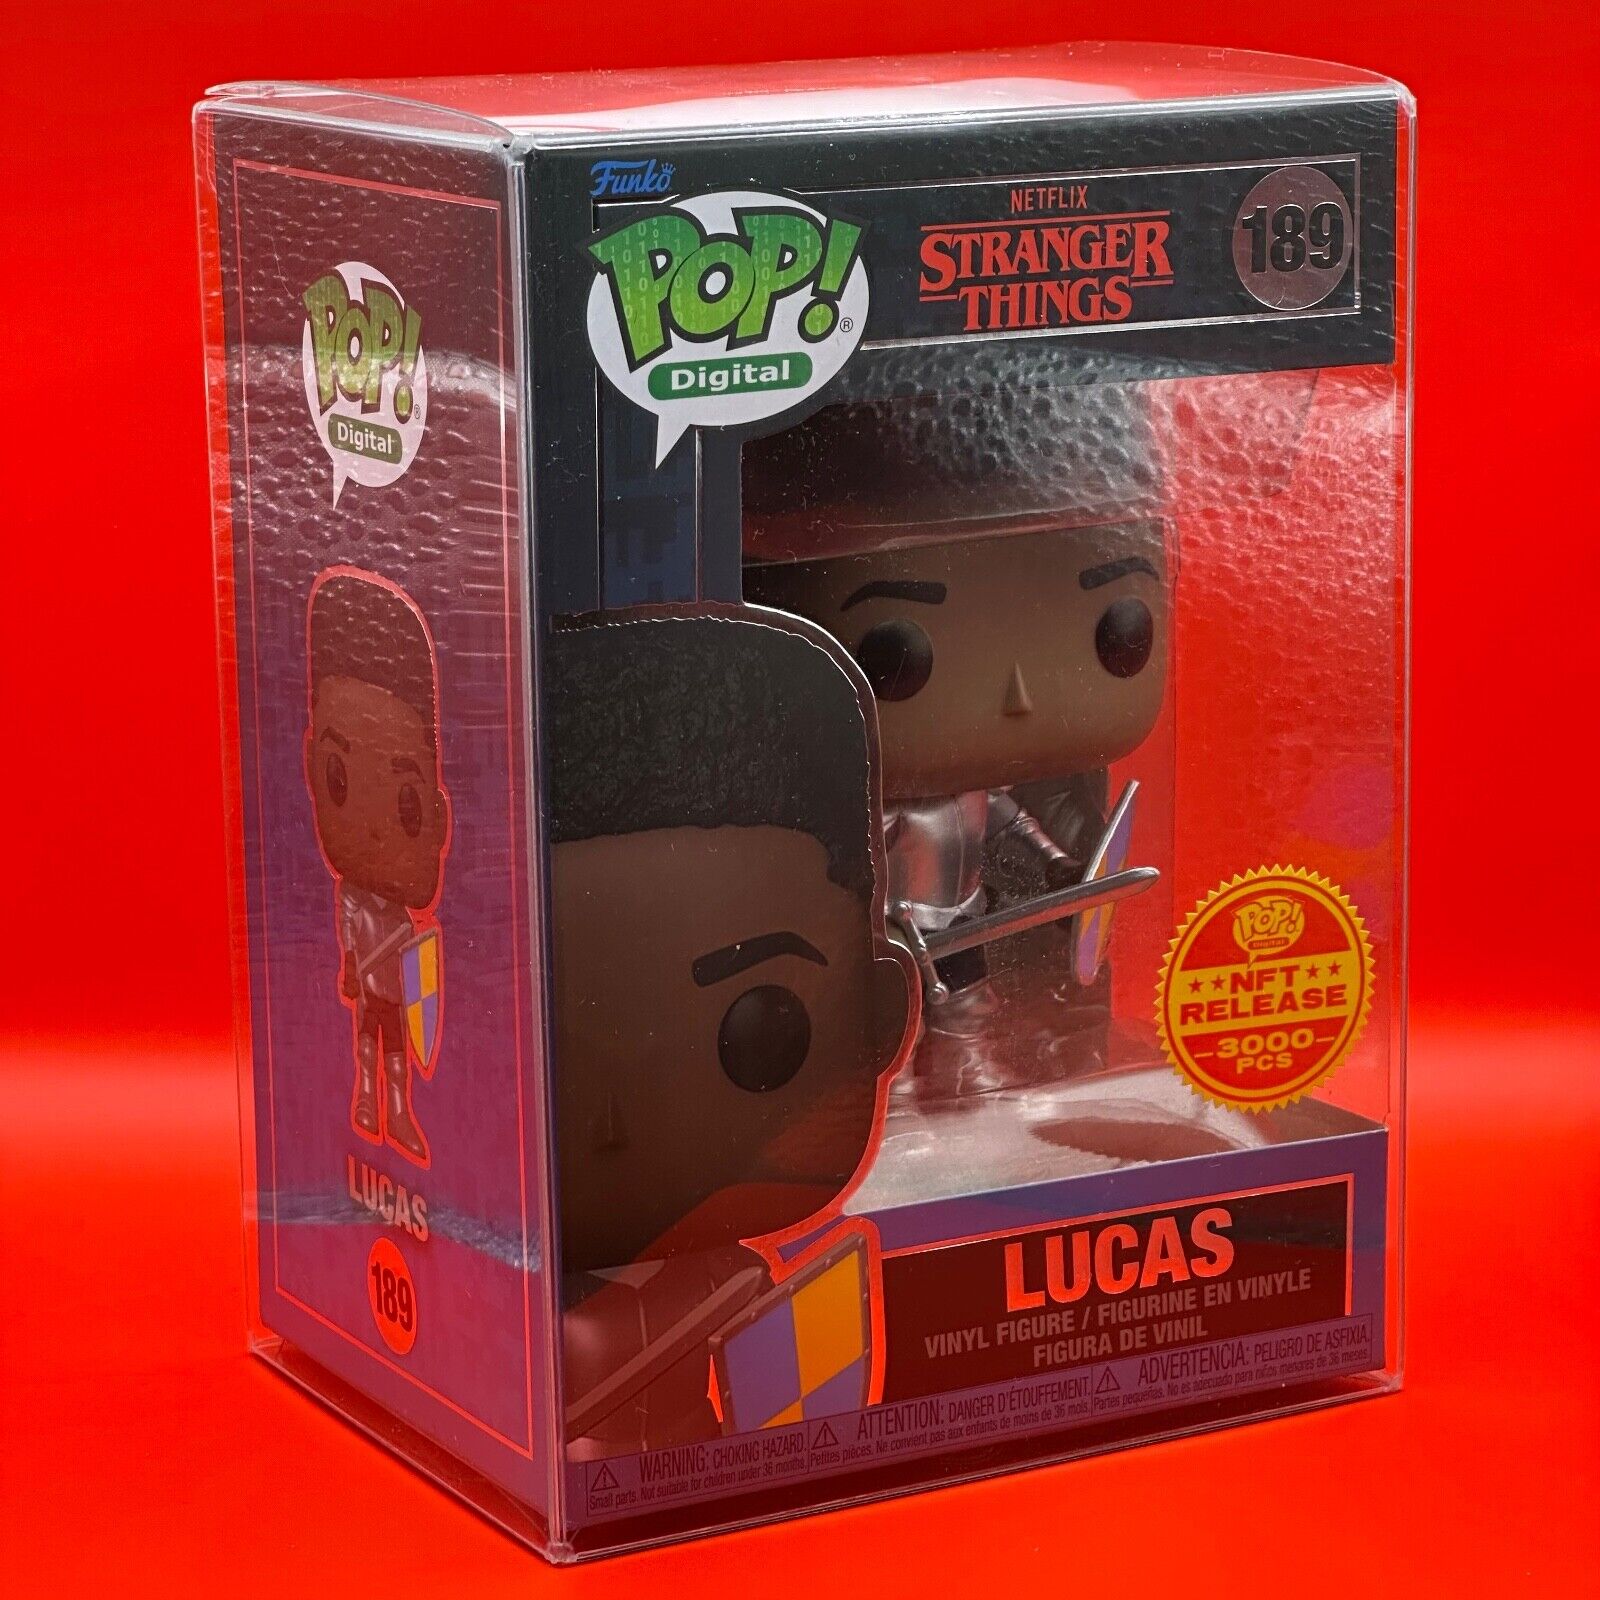 Funko Pop Digital Exclusive Lucas Stranger Things #189 LE3000 Only 2318 made